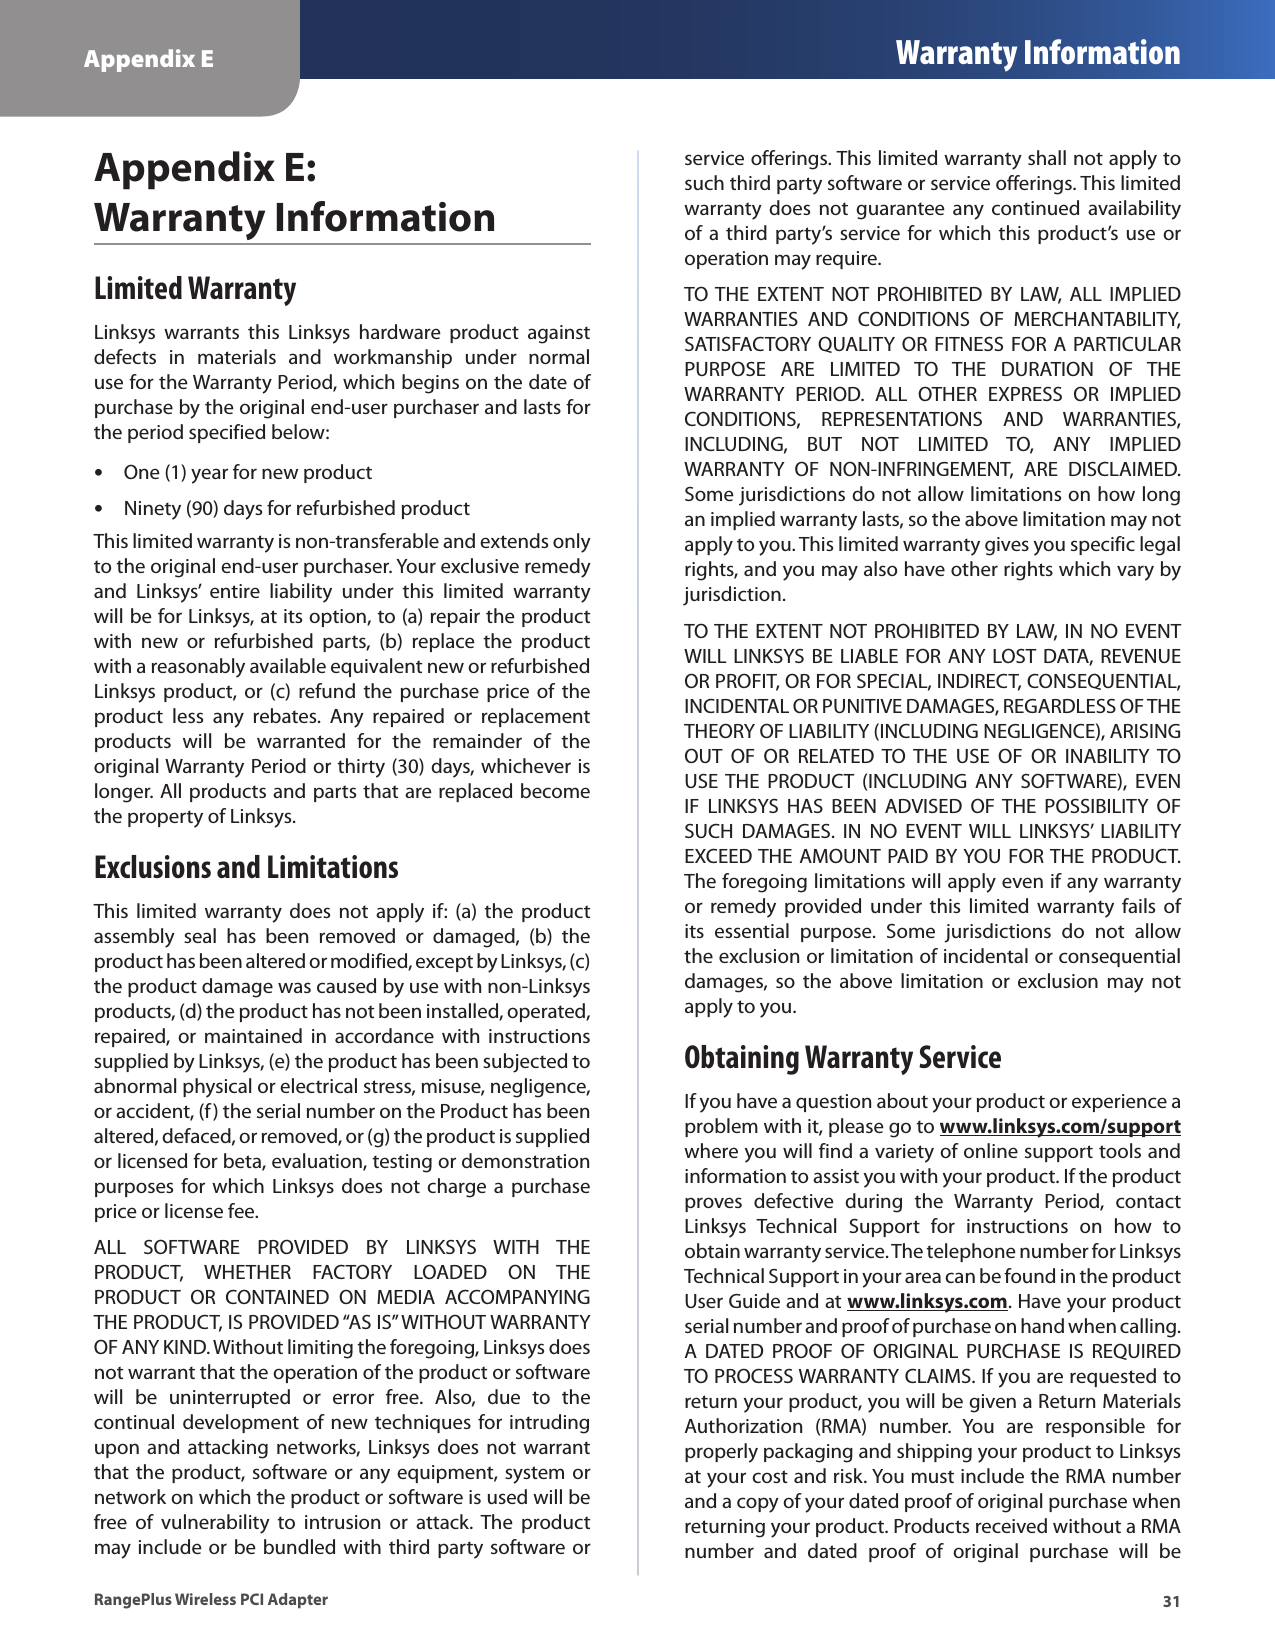 Appendix E Warranty Information31RangePlus Wireless PCI AdapterAppendix E:  Warranty InformationLimited WarrantyLinksys  warrants  this  Linksys  hardware  product  against defects  in  materials  and  workmanship  under  normal use for the Warranty Period, which begins on the date of purchase by the original end-user purchaser and lasts for the period specified below:One (1) year for new productNinety (90) days for refurbished productThis limited warranty is non-transferable and extends only to the original end-user purchaser. Your exclusive remedy and  Linksys’  entire  liability  under  this  limited  warranty will be for Linksys, at its option, to (a) repair the product with  new  or  refurbished  parts,  (b)  replace  the  product with a reasonably available equivalent new or refurbished Linksys product,  or  (c)  refund the  purchase  price  of  the product  less  any  rebates.  Any  repaired  or  replacement products  will  be  warranted  for  the  remainder  of  the original Warranty Period or thirty (30) days, whichever is longer. All products and parts that are replaced become the property of Linksys.Exclusions and LimitationsThis  limited  warranty  does  not  apply  if:  (a) the  product assembly  seal  has  been  removed  or  damaged,  (b)  the product has been altered or modified, except by Linksys, (c) the product damage was caused by use with non-Linksys products, (d) the product has not been installed, operated, repaired,  or  maintained  in  accordance with  instructions supplied by Linksys, (e) the product has been subjected to abnormal physical or electrical stress, misuse, negligence, or accident, (f) the serial number on the Product has been altered, defaced, or removed, or (g) the product is supplied or licensed for beta, evaluation, testing or demonstration purposes for which  Linksys  does not charge a  purchase price or license fee.ALL  SOFTWARE  PROVIDED  BY  LINKSYS  WITH  THE PRODUCT,  WHETHER  FACTORY  LOADED  ON  THE PRODUCT  OR  CONTAINED  ON  MEDIA  ACCOMPANYING THE PRODUCT, IS PROVIDED “AS IS” WITHOUT WARRANTY OF ANY KIND. Without limiting the foregoing, Linksys does not warrant that the operation of the product or software will  be  uninterrupted  or  error  free.  Also,  due  to  the continual development of new techniques  for intruding upon and  attacking  networks, Linksys  does  not  warrant that the product,  software or  any equipment, system or network on which the product or software is used will be free  of  vulnerability  to  intrusion  or  attack.  The  product may include or be bundled with third party  software or ••service offerings. This limited warranty shall not apply to such third party software or service offerings. This limited warranty  does  not  guarantee  any  continued availability of a  third party’s service  for  which  this  product’s  use  or operation may require. TO THE  EXTENT  NOT  PROHIBITED  BY  LAW,  ALL  IMPLIED WARRANTIES  AND  CONDITIONS  OF  MERCHANTABILITY, SATISFACTORY QUALITY  OR FITNESS  FOR A  PARTICULAR PURPOSE  ARE  LIMITED  TO  THE  DURATION  OF  THE WARRANTY  PERIOD.  ALL  OTHER  EXPRESS  OR  IMPLIED CONDITIONS,  REPRESENTATIONS  AND  WARRANTIES, INCLUDING,  BUT  NOT  LIMITED  TO,  ANY  IMPLIED WARRANTY  OF  NON-INFRINGEMENT,  ARE  DISCLAIMED. Some jurisdictions do not allow limitations on how long an implied warranty lasts, so the above limitation may not apply to you. This limited warranty gives you specific legal rights, and you may also have other rights which vary by jurisdiction.TO THE EXTENT NOT PROHIBITED BY LAW, IN NO EVENT WILL LINKSYS BE LIABLE FOR ANY LOST DATA,  REVENUE OR PROFIT, OR FOR SPECIAL, INDIRECT, CONSEQUENTIAL, INCIDENTAL OR PUNITIVE DAMAGES, REGARDLESS OF THE THEORY OF LIABILITY (INCLUDING NEGLIGENCE), ARISING OUT  OF  OR  RELATED TO  THE  USE  OF  OR  INABILITY  TO USE THE  PRODUCT  (INCLUDING  ANY  SOFTWARE),  EVEN IF  LINKSYS  HAS  BEEN  ADVISED  OF THE  POSSIBILITY  OF SUCH  DAMAGES.  IN  NO  EVENT  WILL  LINKSYS’  LIABILITY EXCEED THE  AMOUNT PAID BY YOU  FOR THE  PRODUCT. The foregoing limitations will apply even if any warranty or  remedy  provided  under  this  limited  warranty  fails  of its  essential  purpose.  Some  jurisdictions  do  not  allow the exclusion or limitation of incidental or consequential damages,  so  the  above  limitation  or  exclusion  may not apply to you.Obtaining Warranty ServiceIf you have a question about your product or experience a problem with it, please go to www.linksys.com/support where you will find a variety of online support tools and information to assist you with your product. If the product proves  defective  during  the  Warranty  Period,  contact Linksys  Technical  Support  for  instructions  on  how  to obtain warranty service. The telephone number for Linksys Technical Support in your area can be found in the product User Guide and at www.linksys.com. Have your product serial number and proof of purchase on hand when calling. A  DATED  PROOF  OF  ORIGINAL  PURCHASE  IS  REQUIRED TO PROCESS WARRANTY CLAIMS. If you are requested to return your product, you will be given a Return Materials Authorization  (RMA)  number.  You  are  responsible  for properly packaging and shipping your product to Linksys at your cost and risk. You must include the RMA number and a copy of your dated proof of original purchase when returning your product. Products received without a RMA number  and  dated  proof  of  original  purchase  will  be 